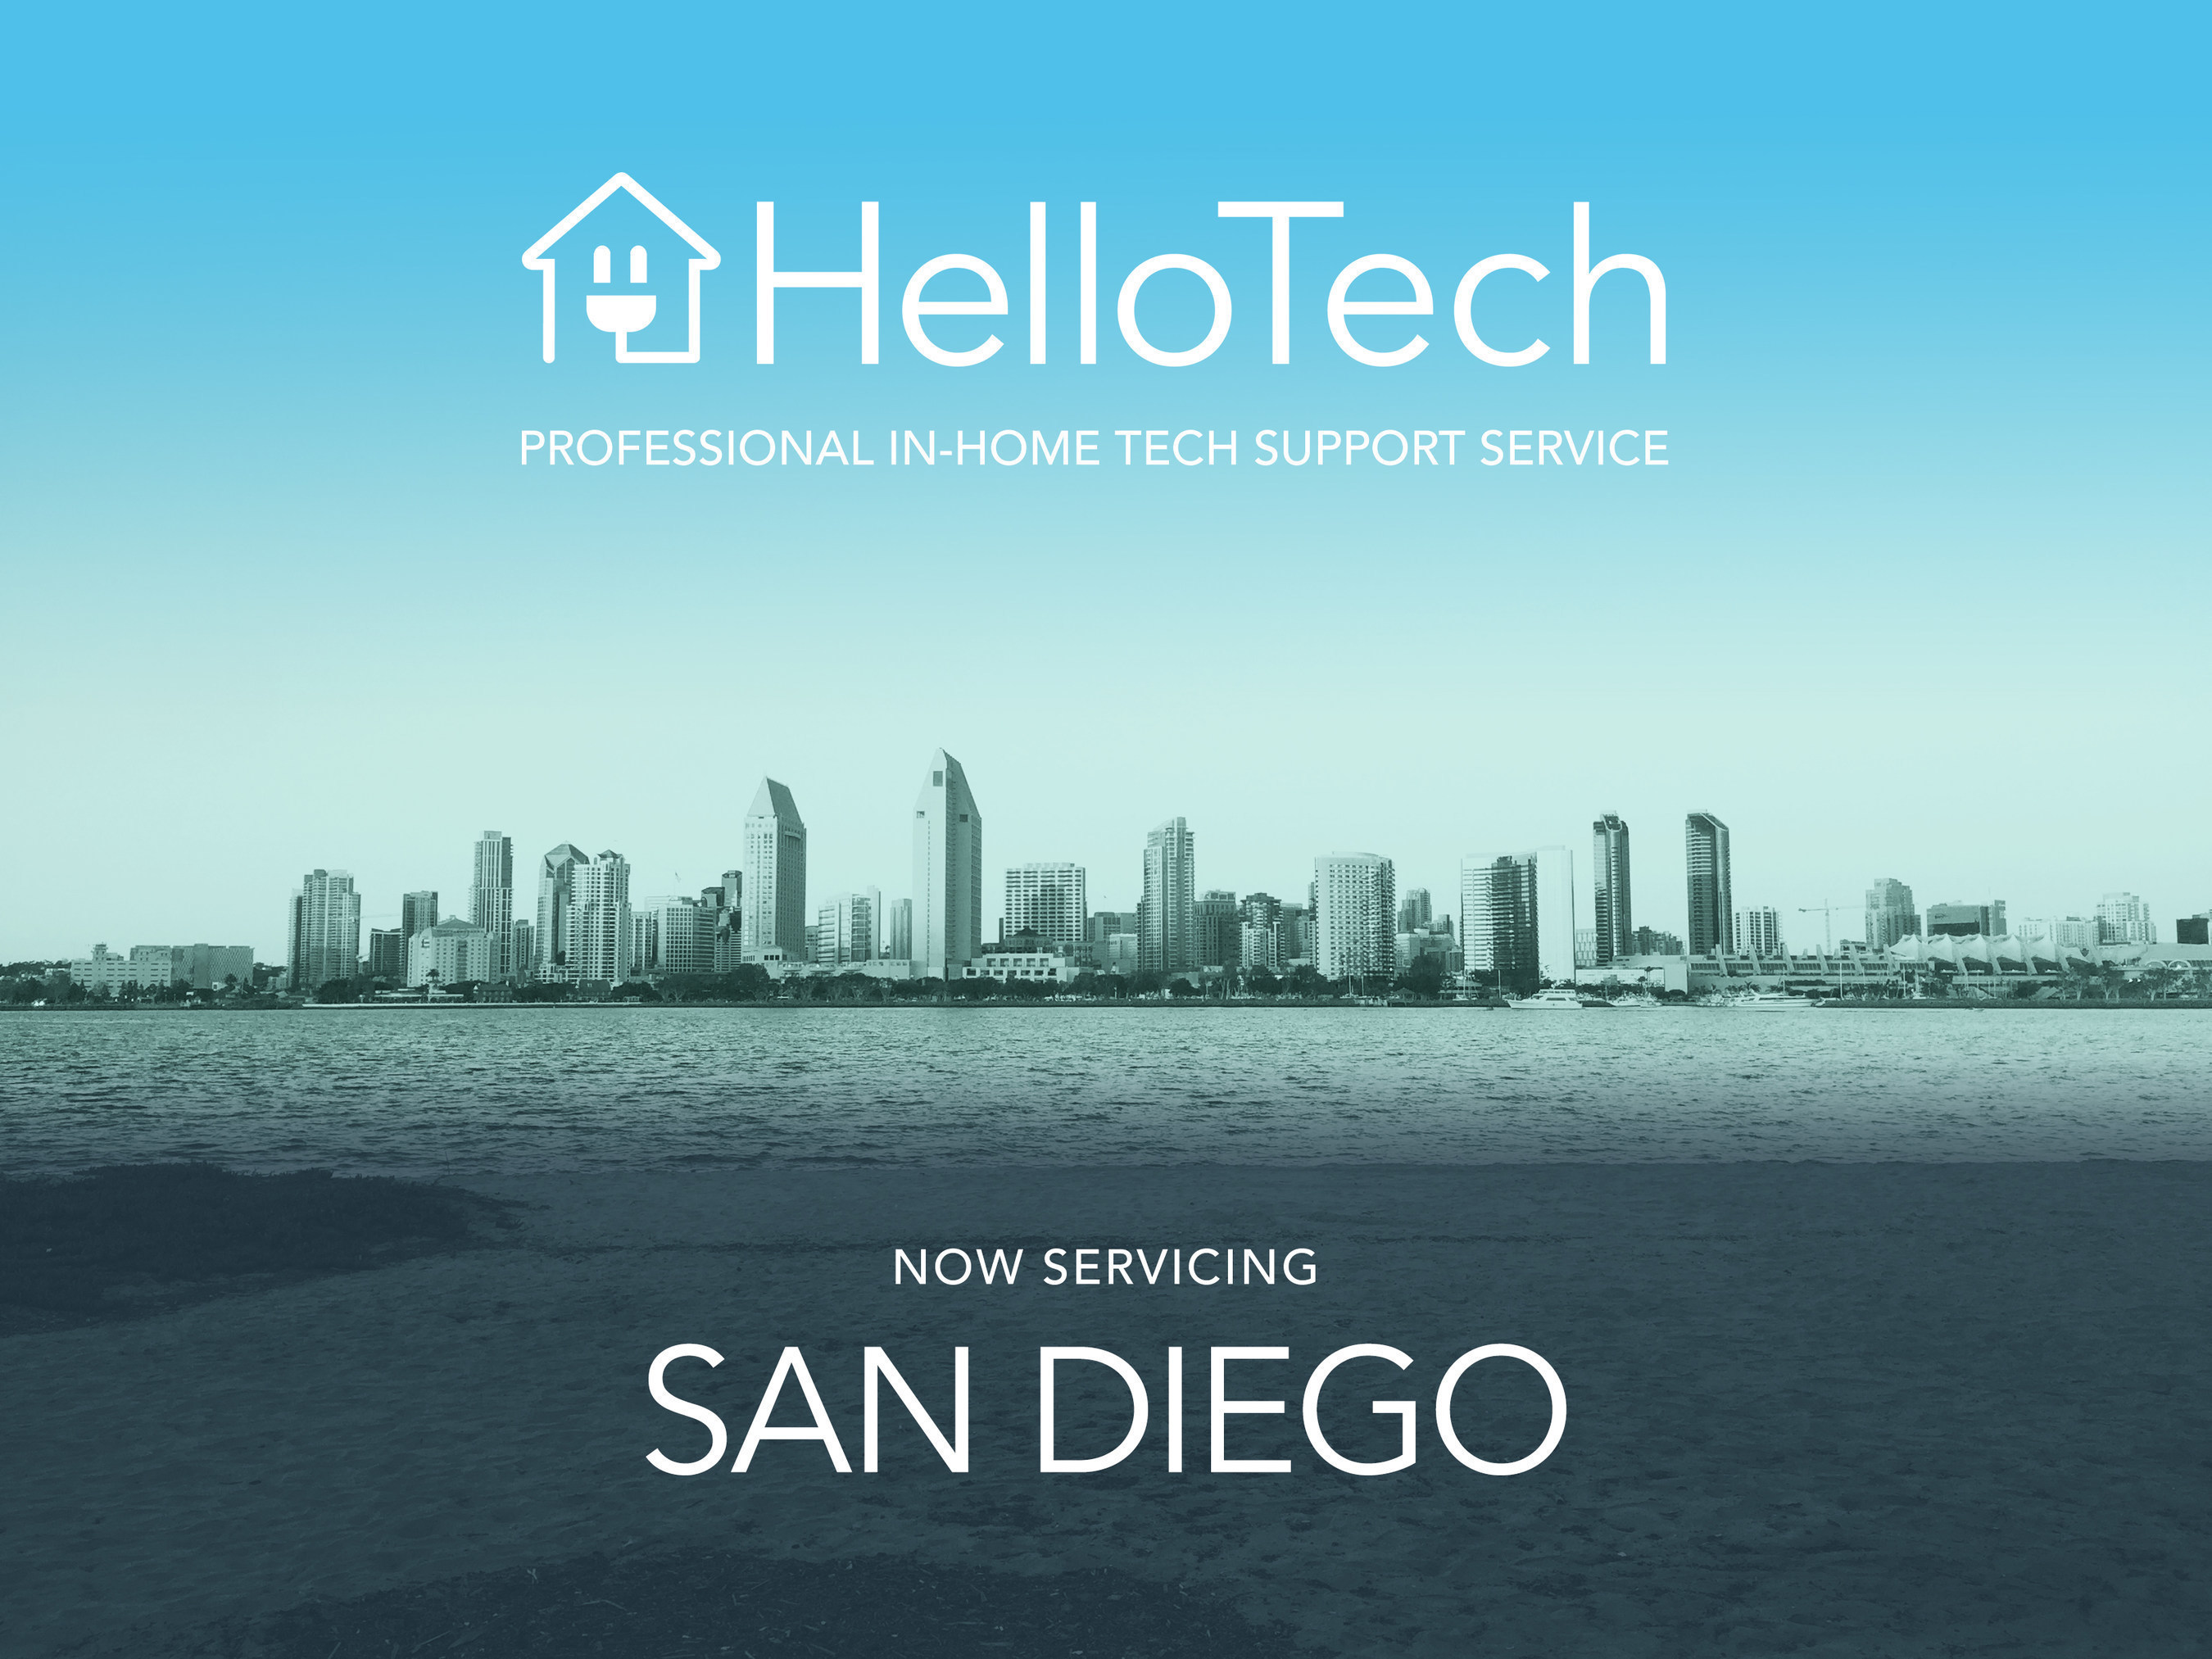 HelloTech launches on demand tech support in San Diego with special Mother's Day promotion